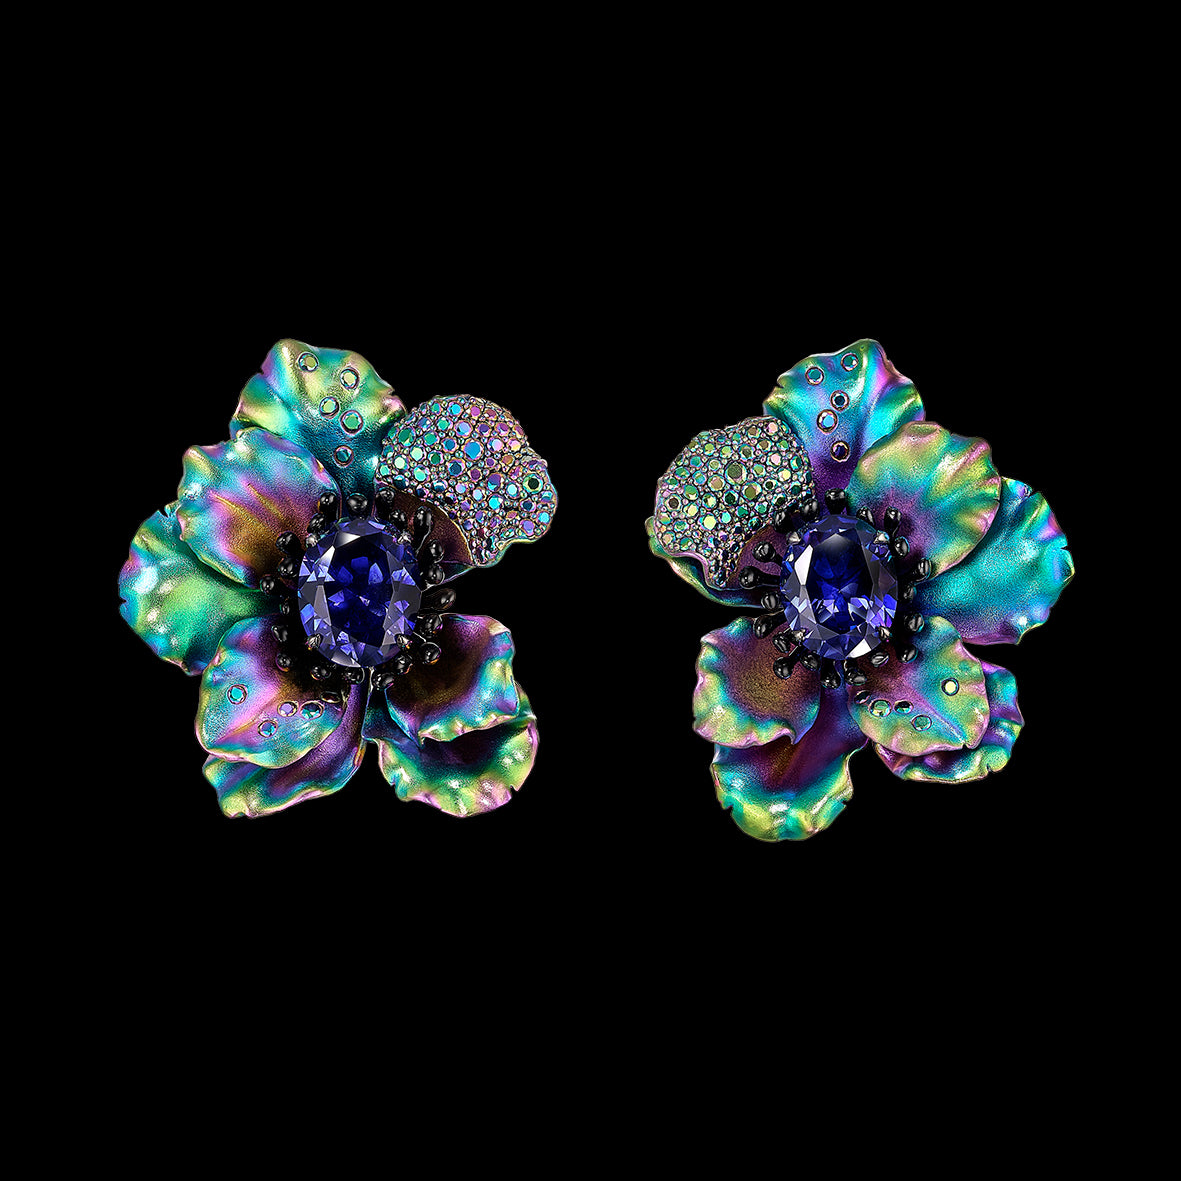 Rainbow Sapphire Poppy Earrings, Earrings, Anabela Chan Joaillerie - Fine jewelry with laboratory grown and created gemstones hand-crafted in the United Kingdom. Anabela Chan Joaillerie is the first fine jewellery brand in the world to champion laboratory-grown and created gemstones with high jewellery design, artisanal craftsmanship and a focus on ethical and sustainable innovations.